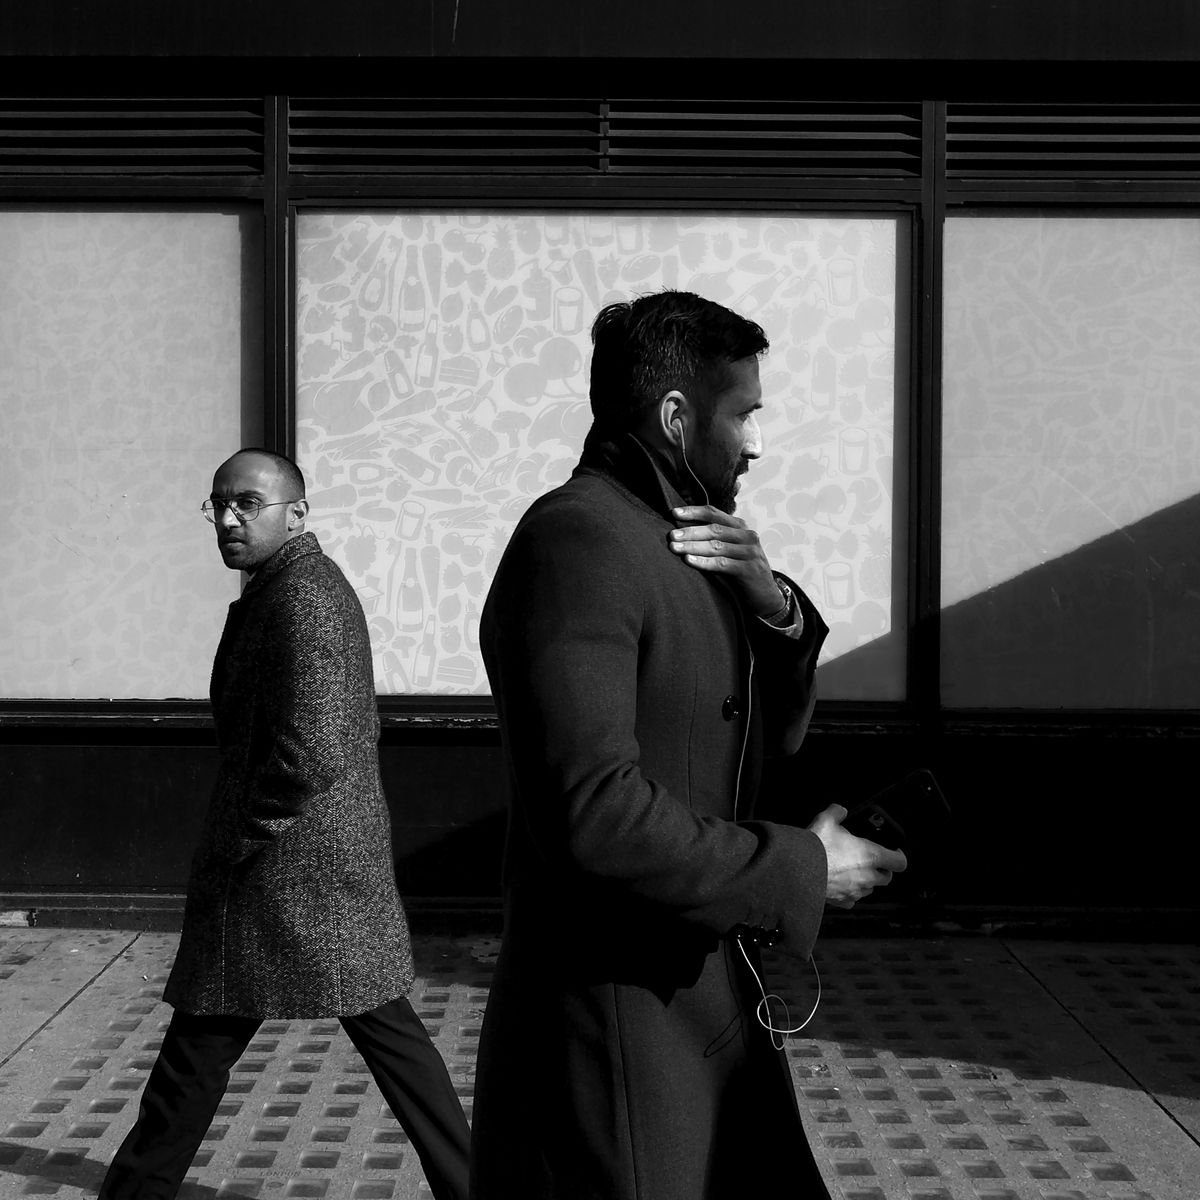 Men In Streets - Black And White London Street Photography Print, 12x12 Inches, C-Type, Un... by Amadeus Long